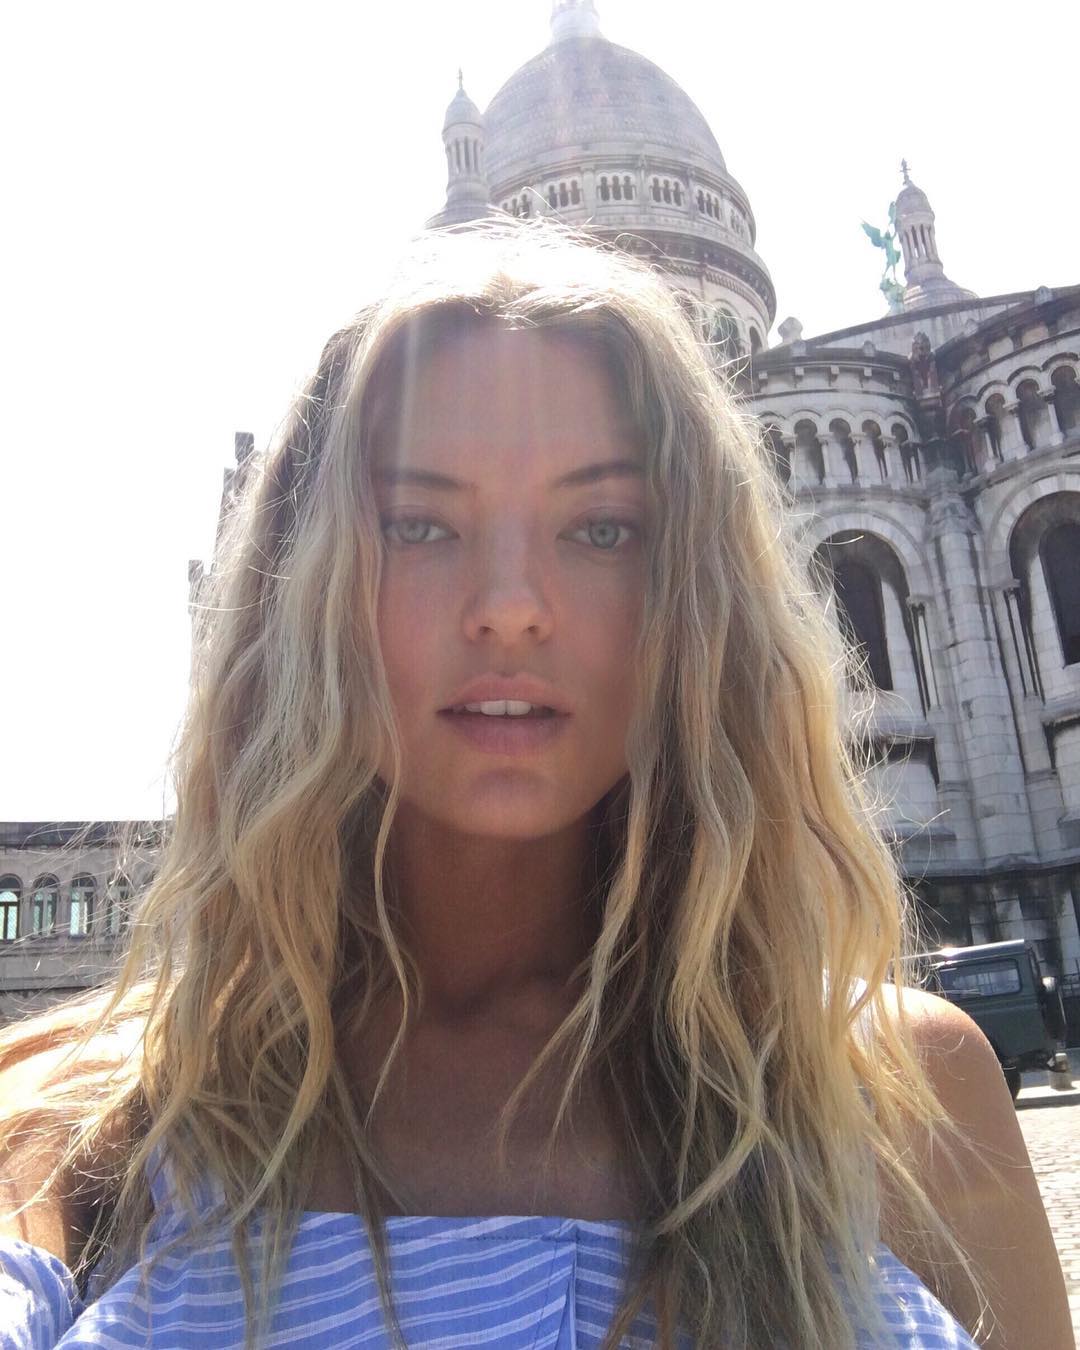 Model Martha Hunt Reveals How She Maintains Her Svelte Figure & Stays Grounded